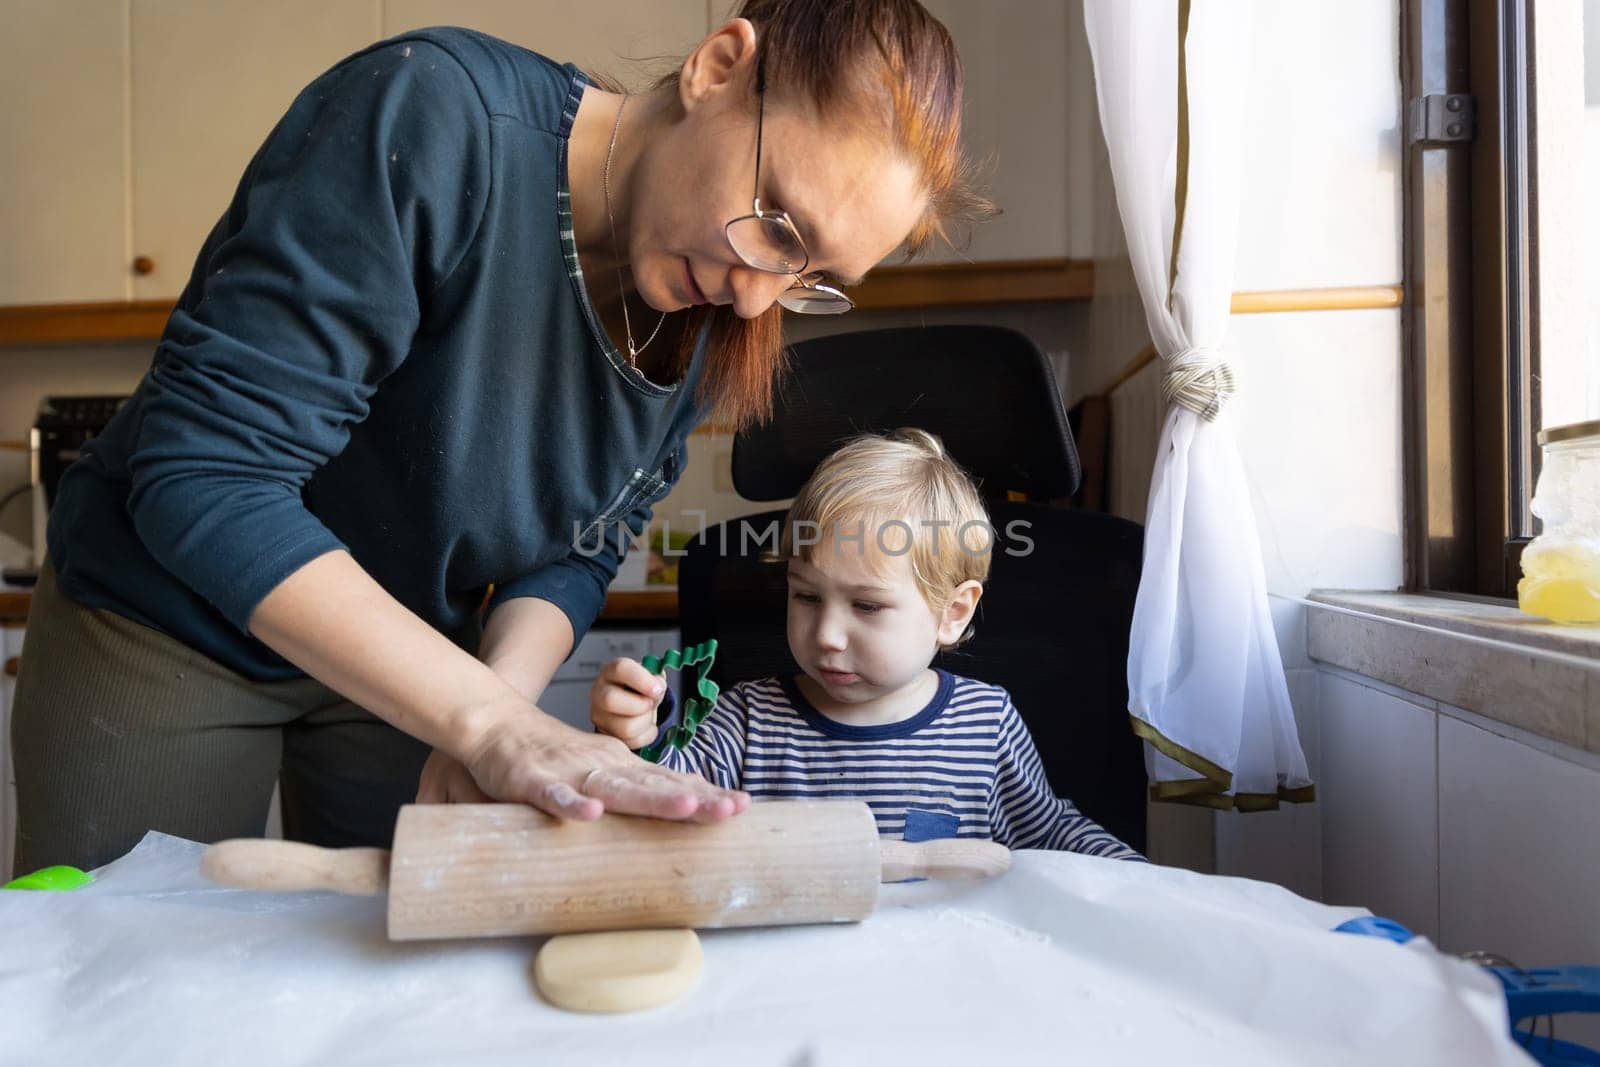 Family cooking - a woman rolling out the dough and her little son looking at her hands. Mid shot